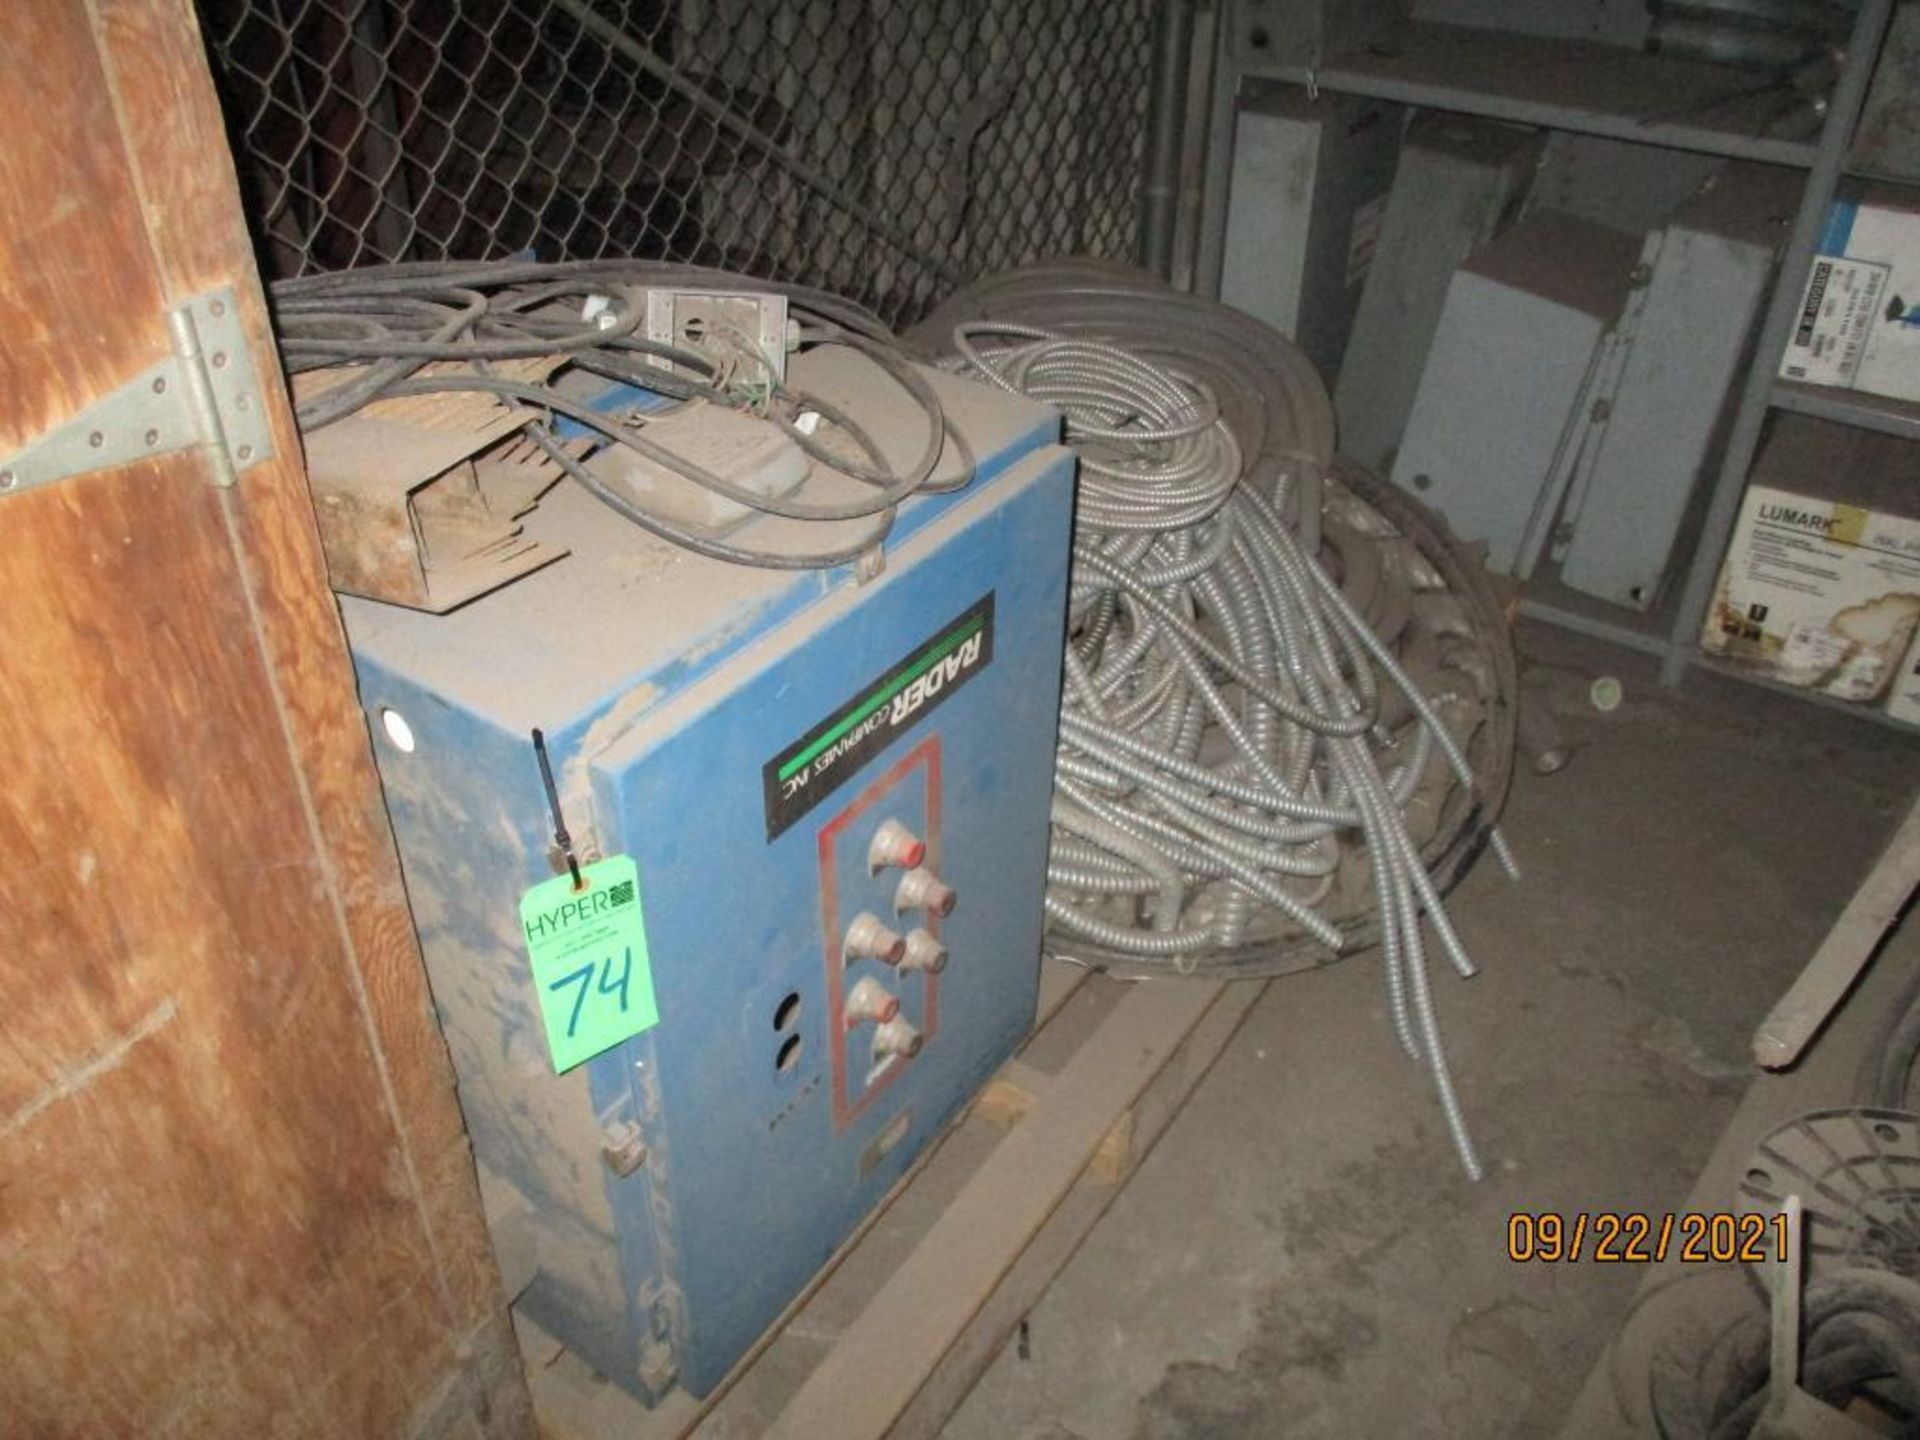 Lot c/o: Large Quantity Of Assorted Electrical Wire With Some Boxes, Located In Upstairs Mezzanine - Image 3 of 17